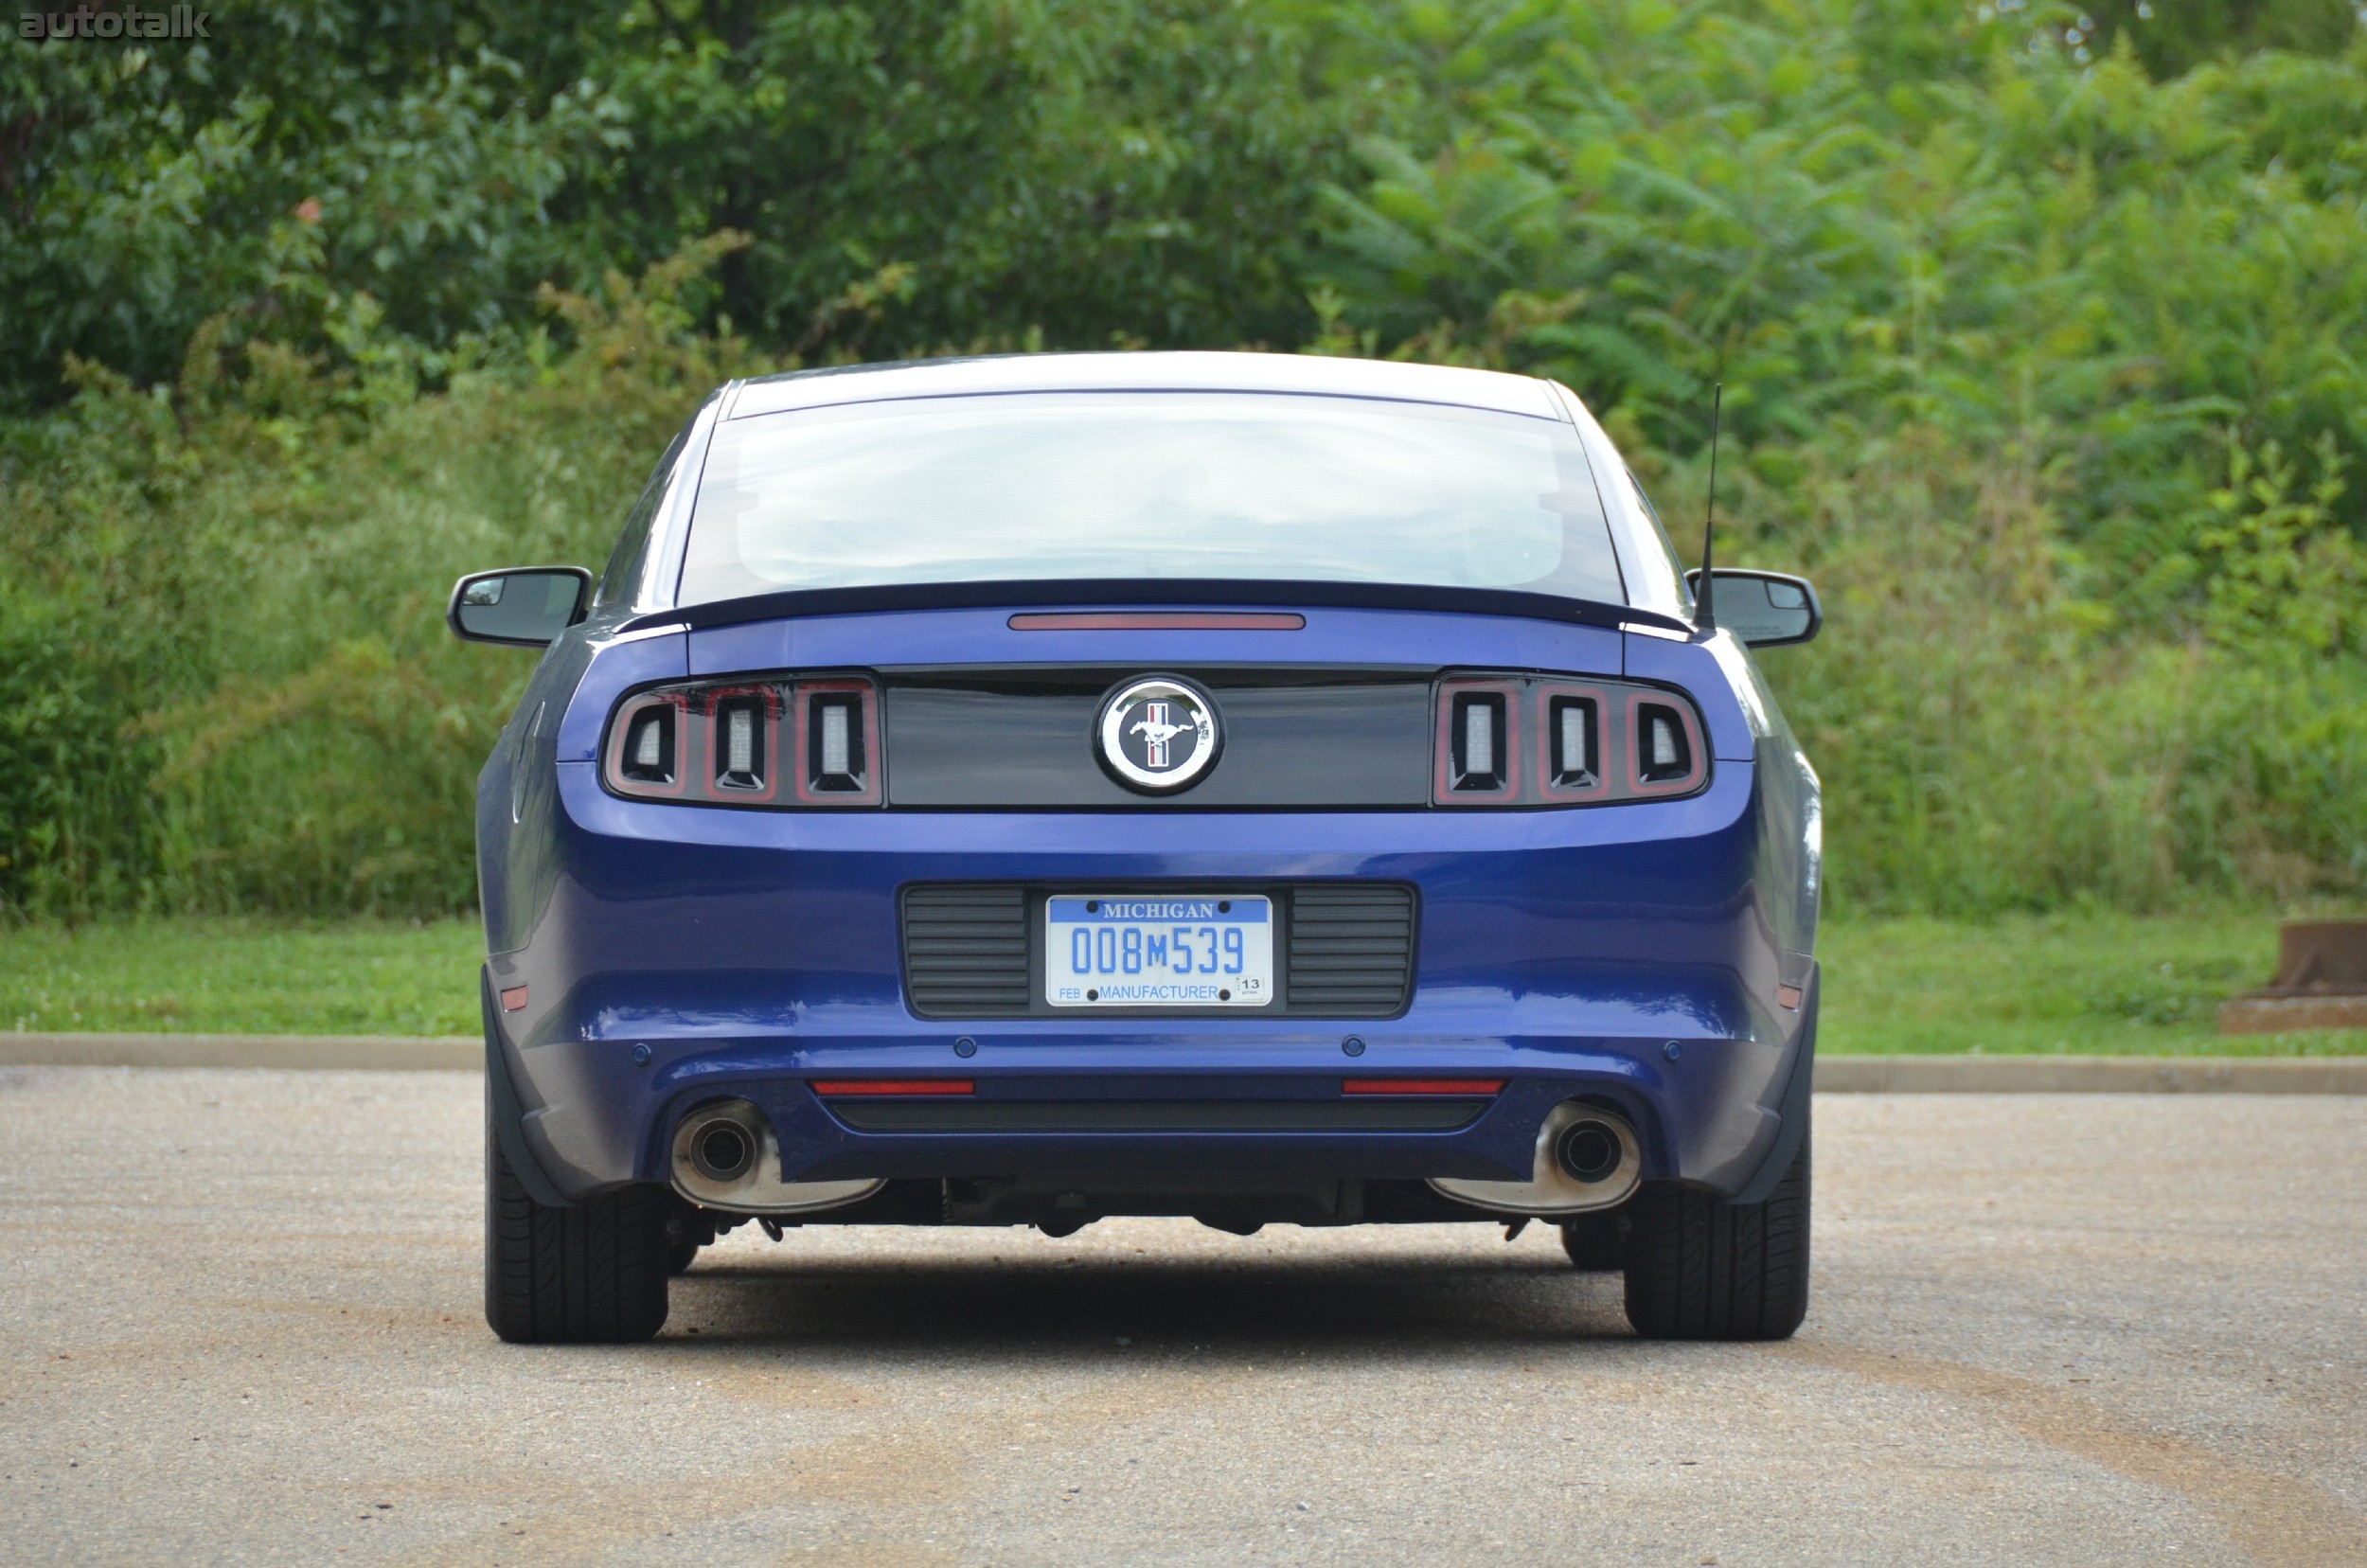 2013 Ford Mustang Review